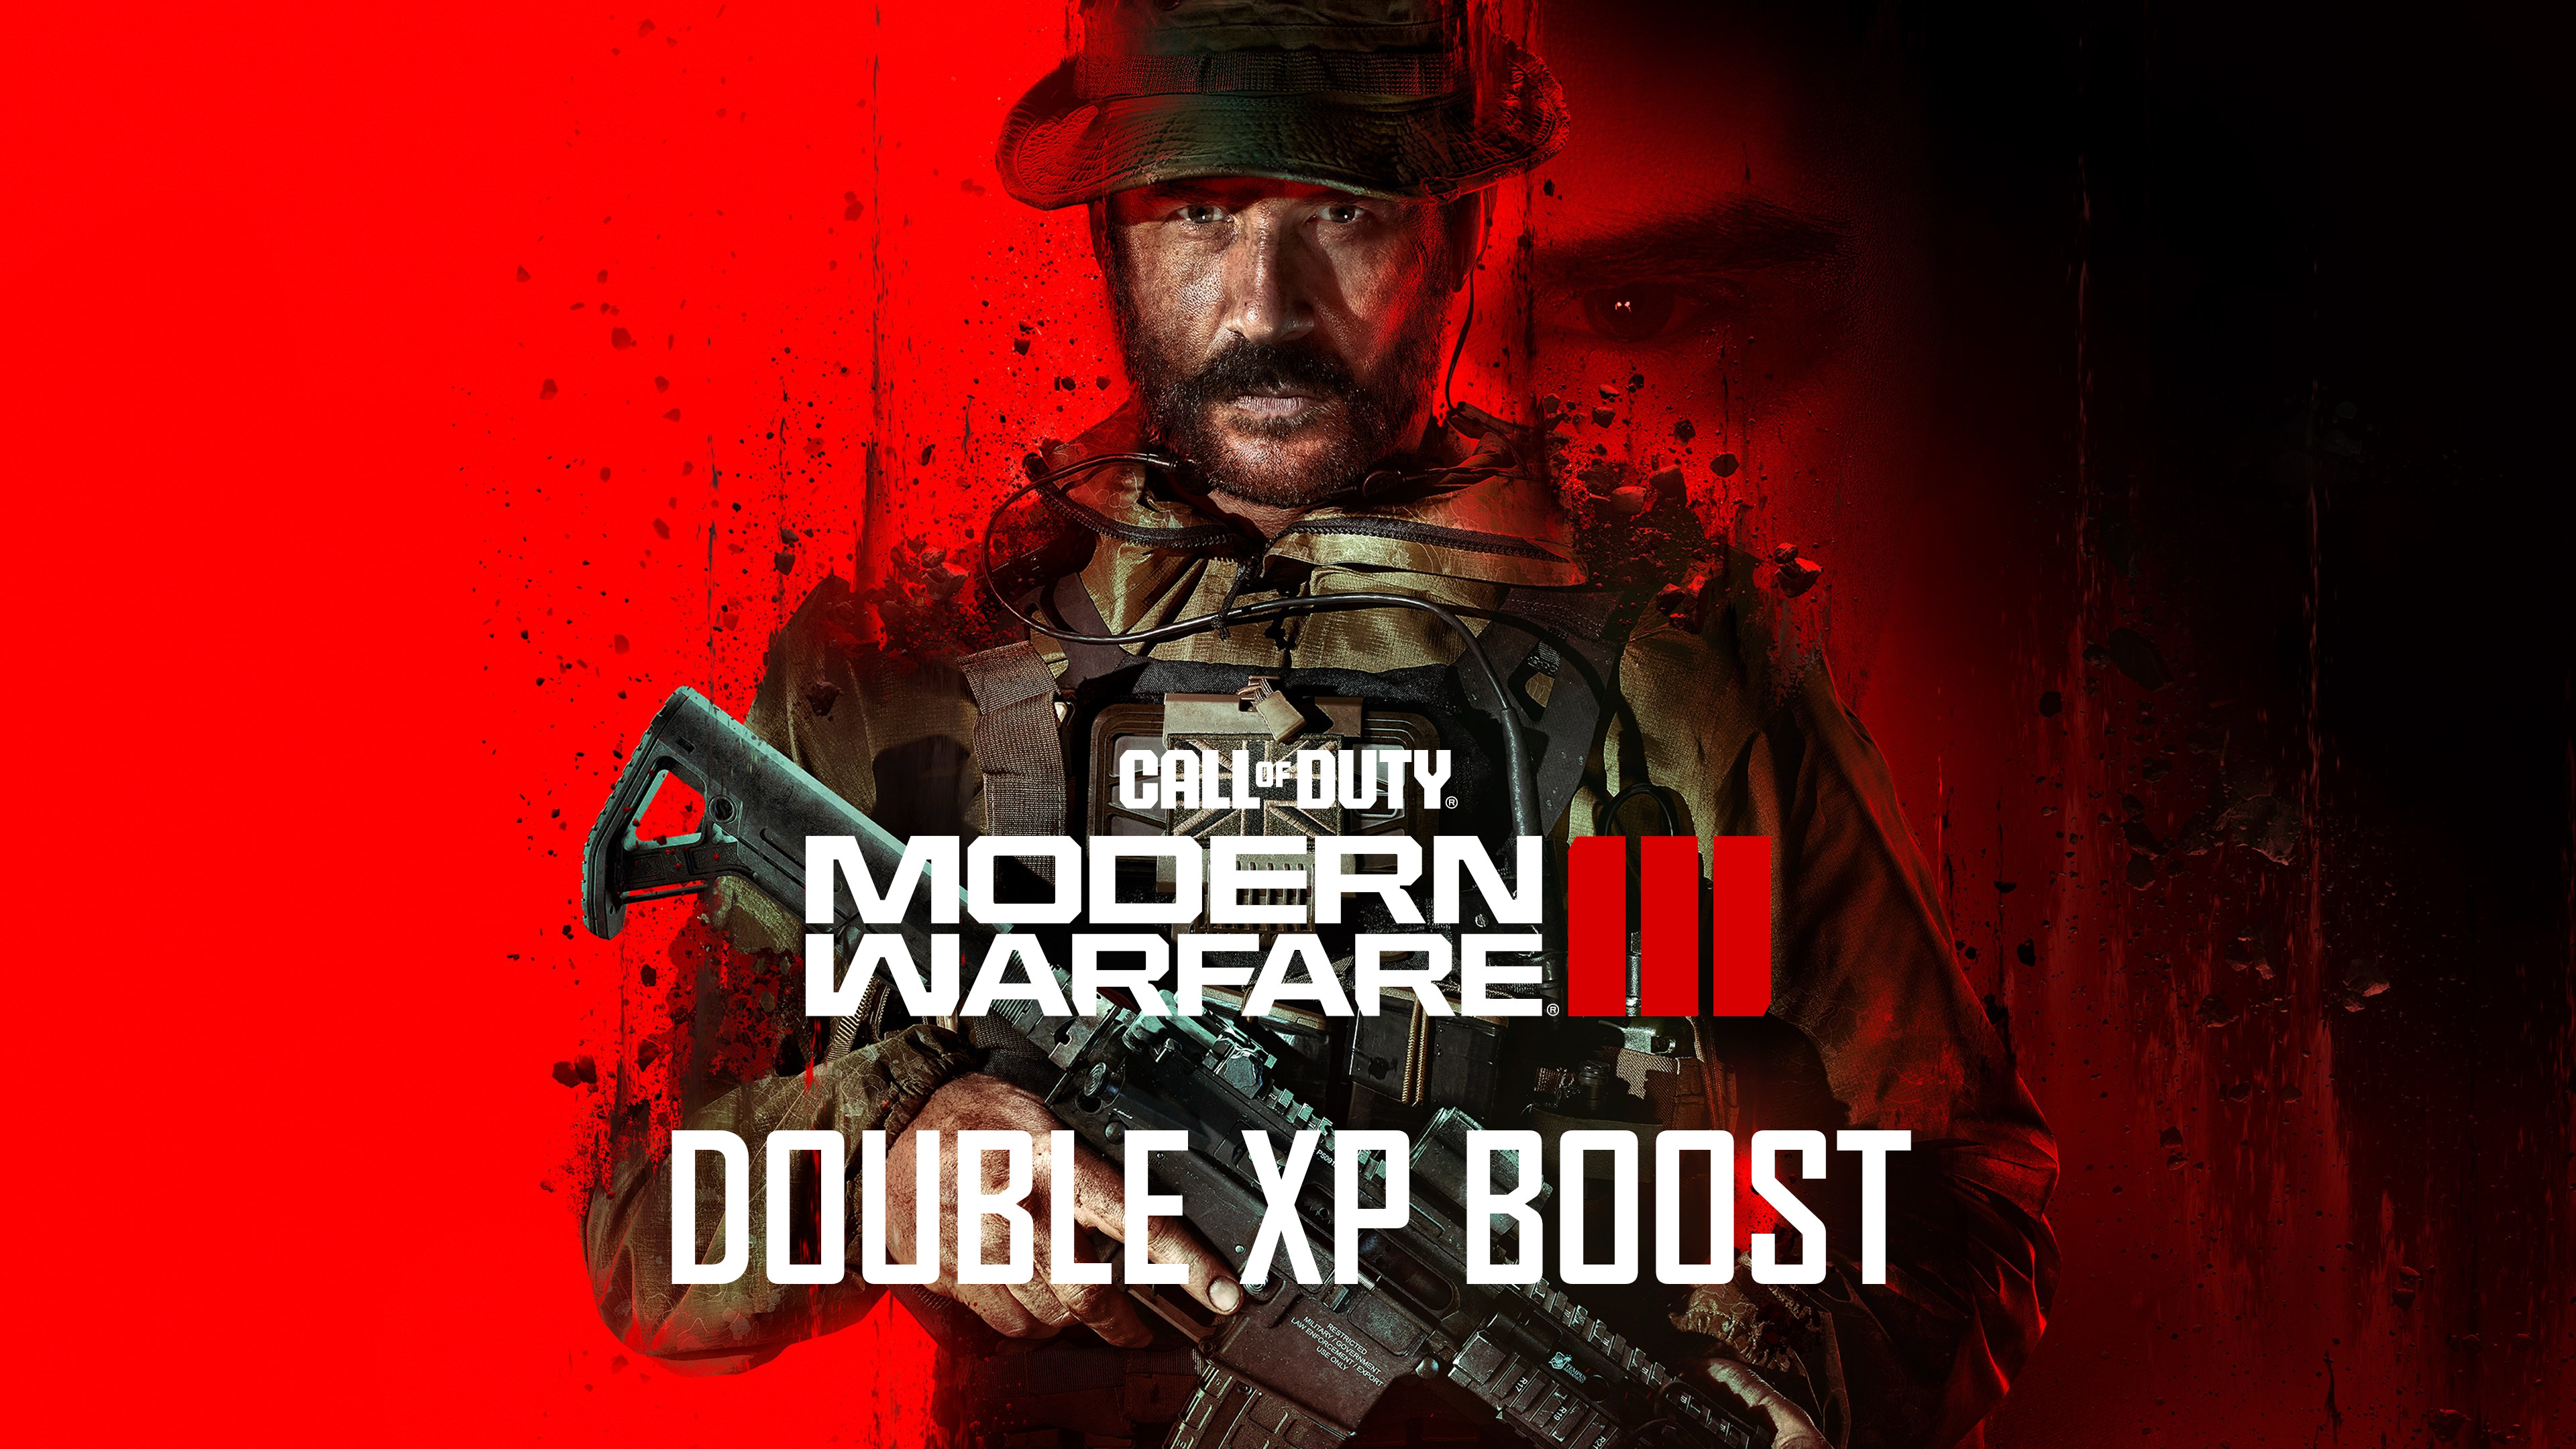 Call of Duty: Modern Warfare III - 3 Hours Double XP Boost PC/PS4/PS5/XBOX One/Series X|S CD Key, 1.93 usd